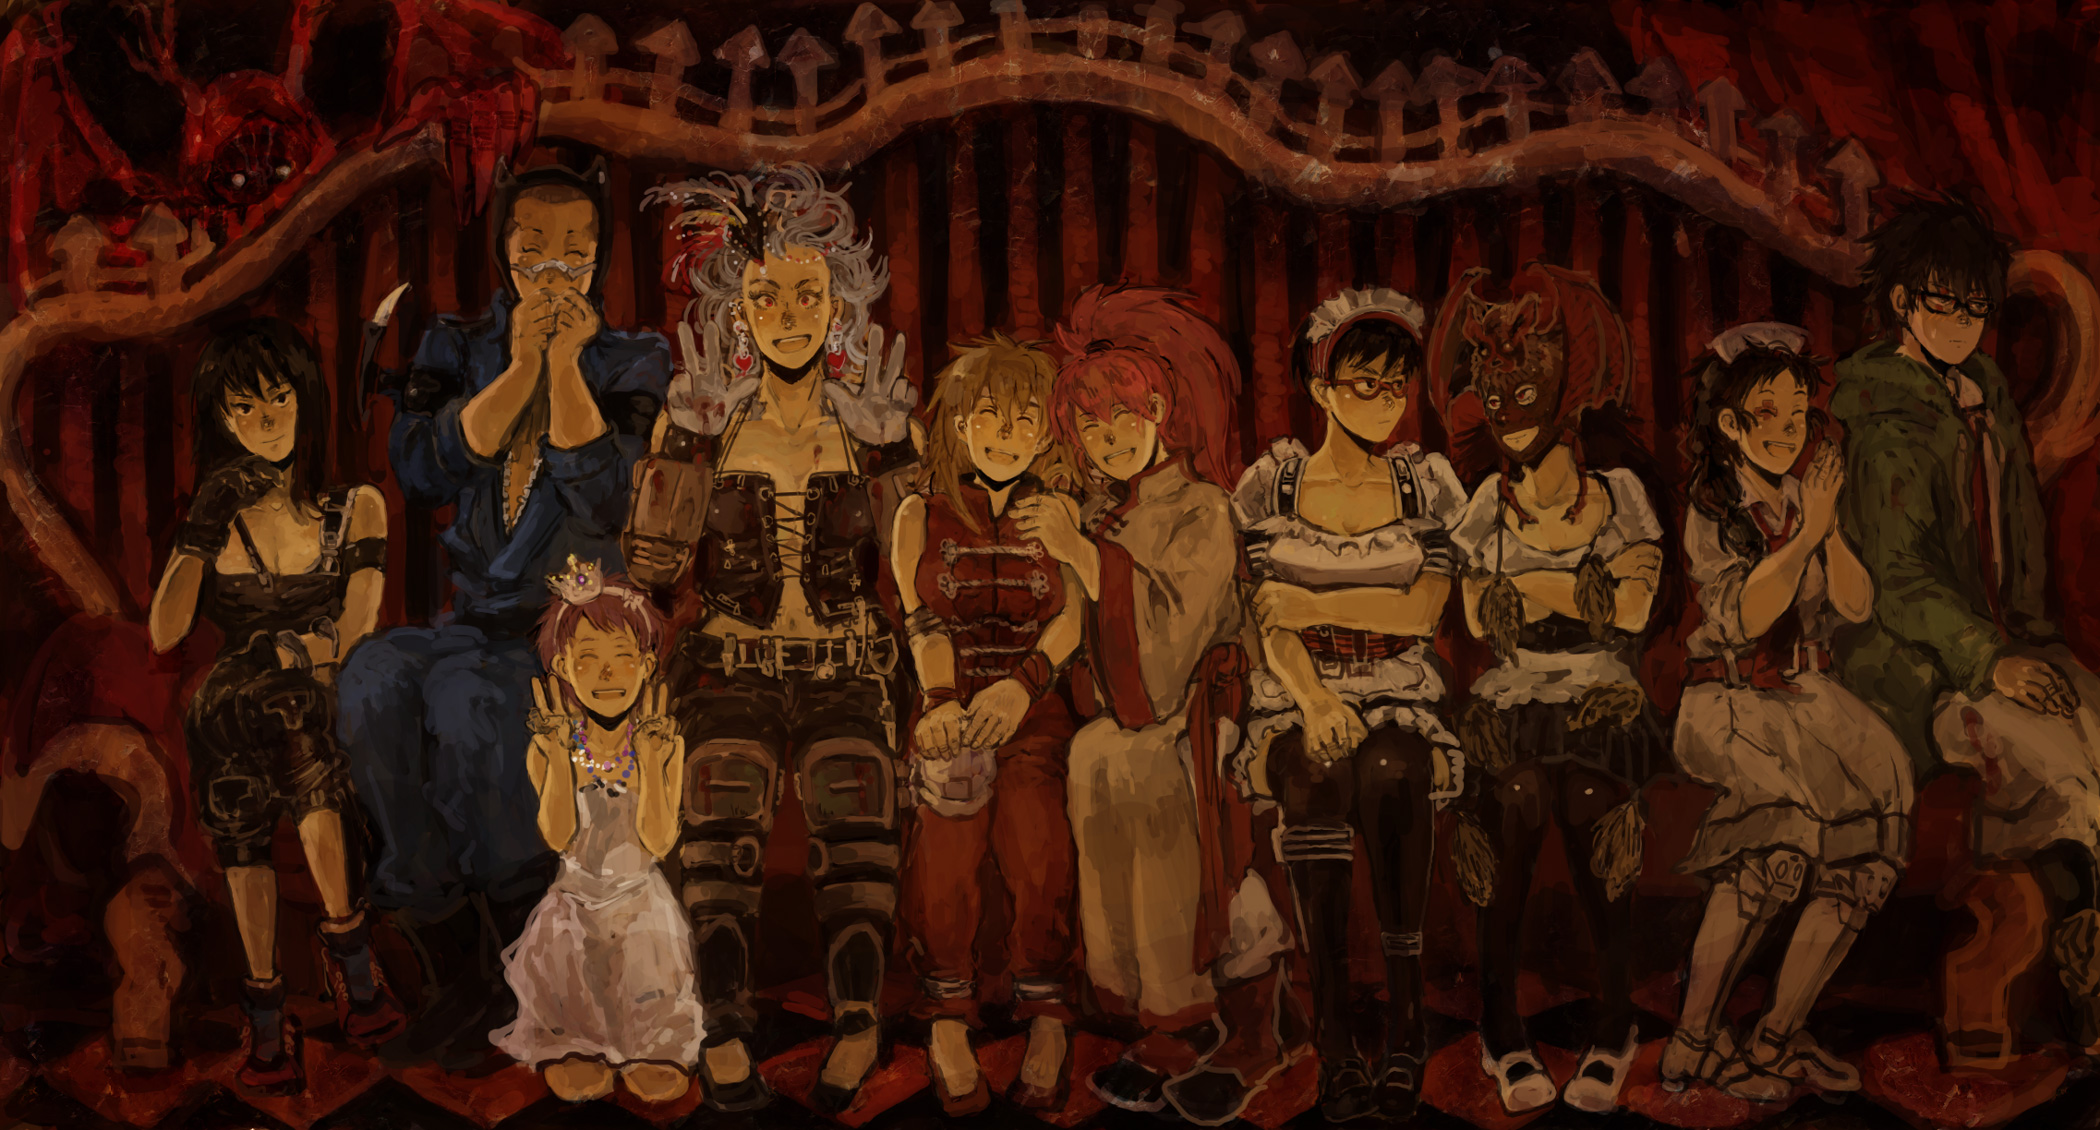 Anime 2100x1130 Dorohedoro anime girls 2D big boobs small boobs manga sketch anime boys long hair short hair blonde gray hair black hair redhead mask cleavage open mouth laughing Noi (Dorohedoro) Nikaido (Dorohedoro) Ebisu (Dorohedoro) Haru (Dorohedoro) maid outfit looking at viewer thighs muscles no bra black corset fan art belly red eyes blue eyes demon blushing anime frontal view